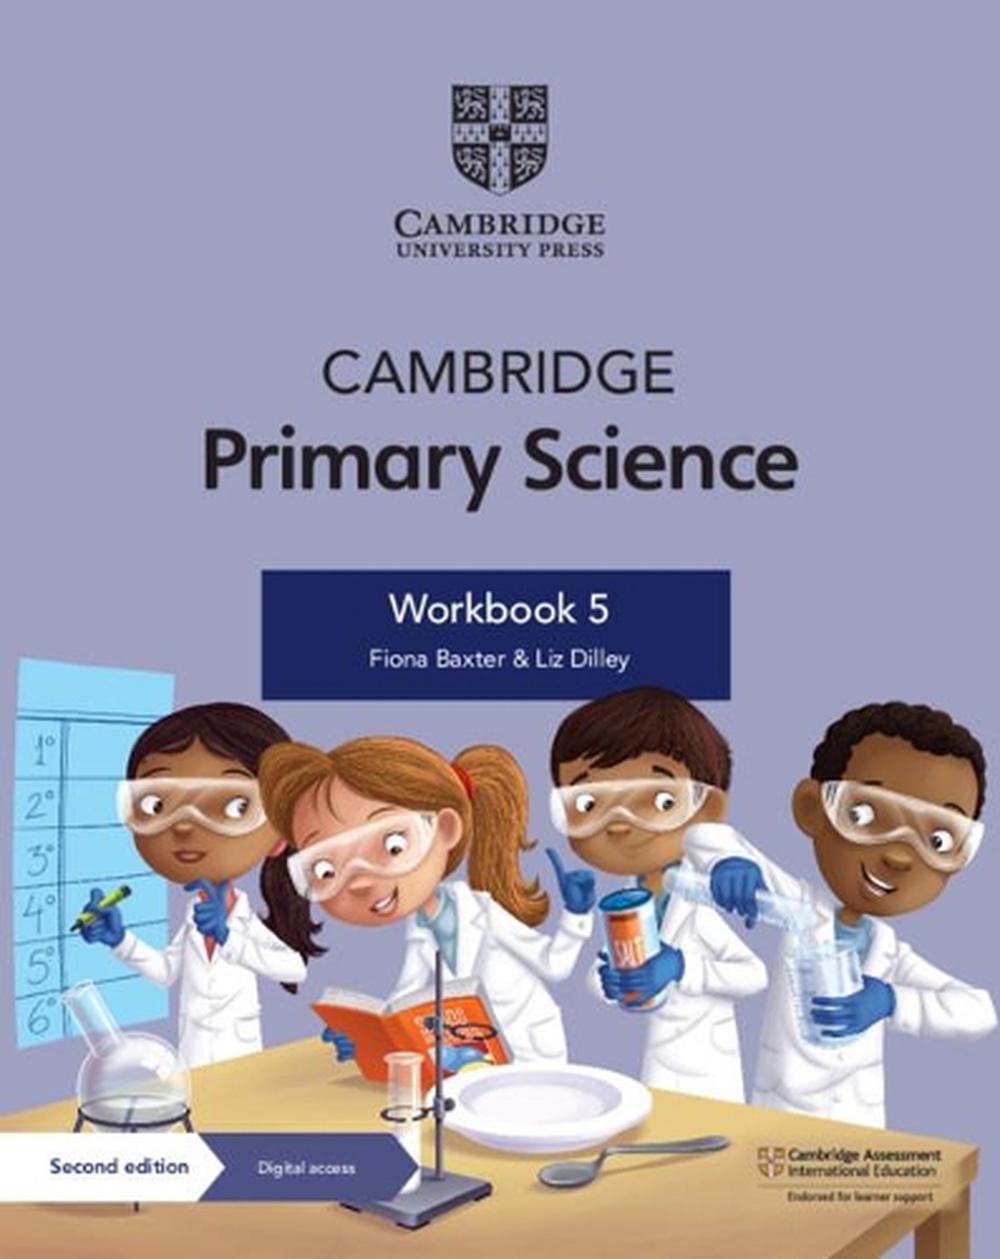 cambridge-primary-science-workbook-5-with-digital-access-1-year-by